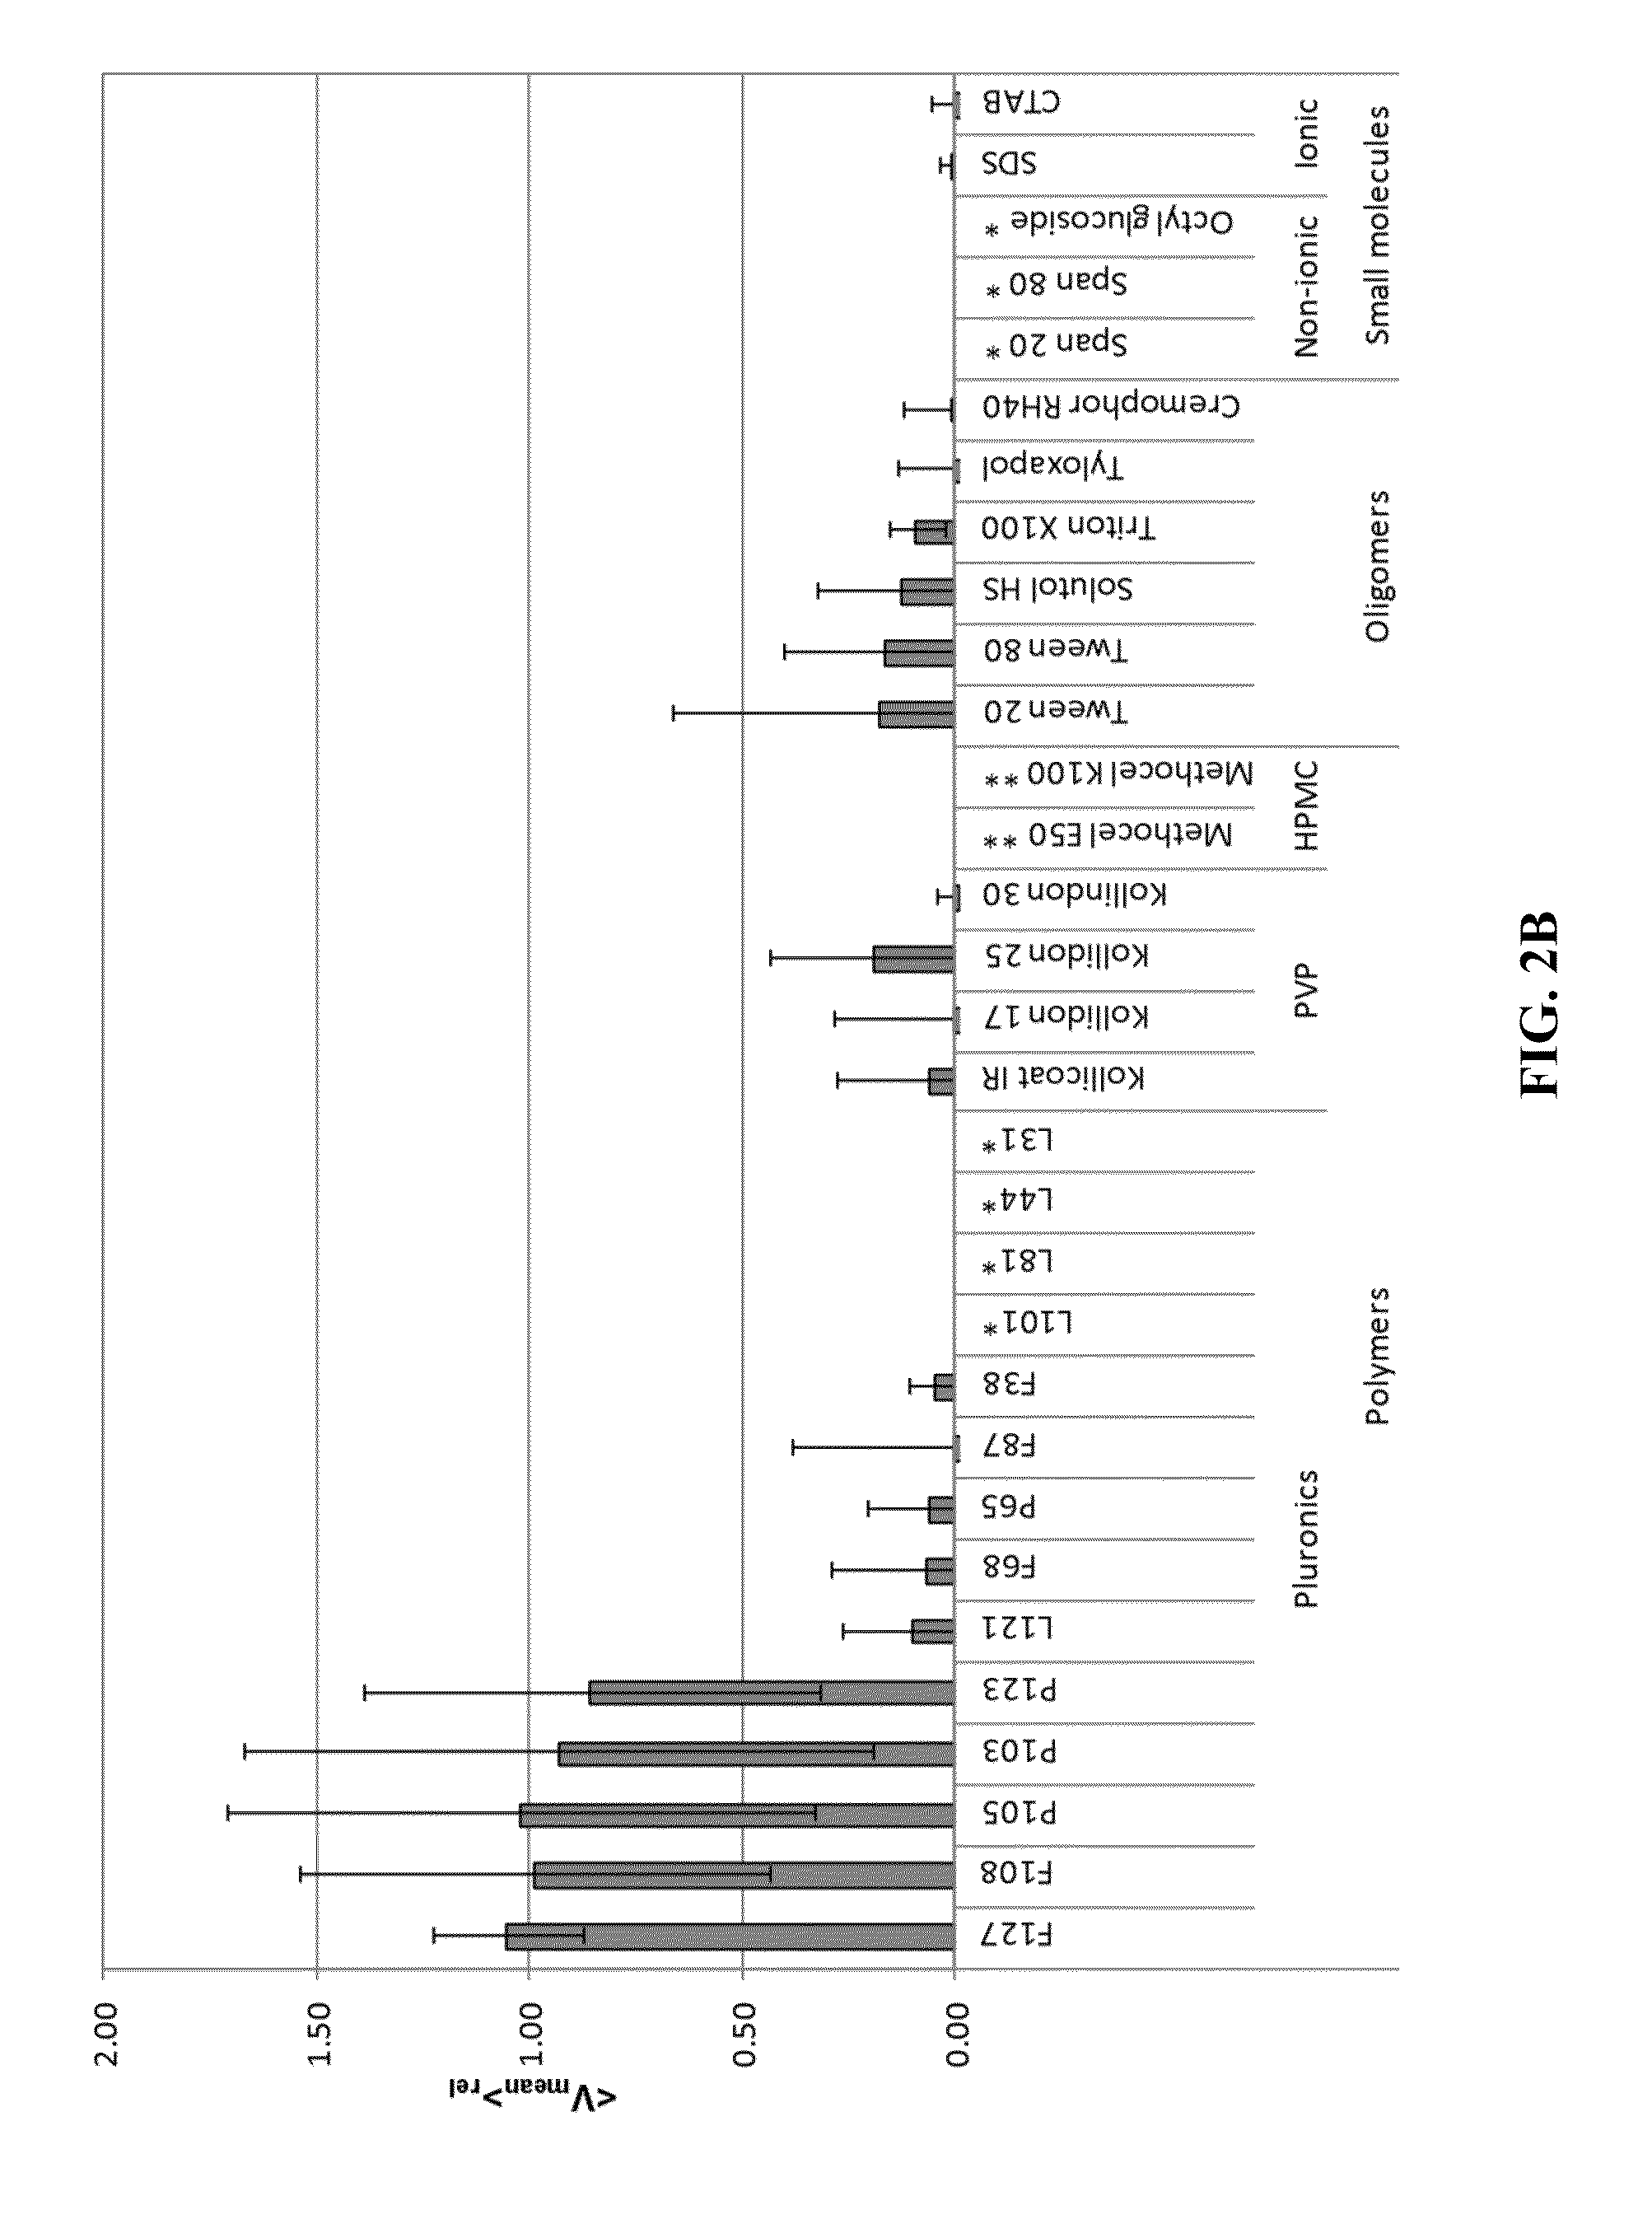 Nanocrystals, compositions, and methods that aid particle transport in mucus